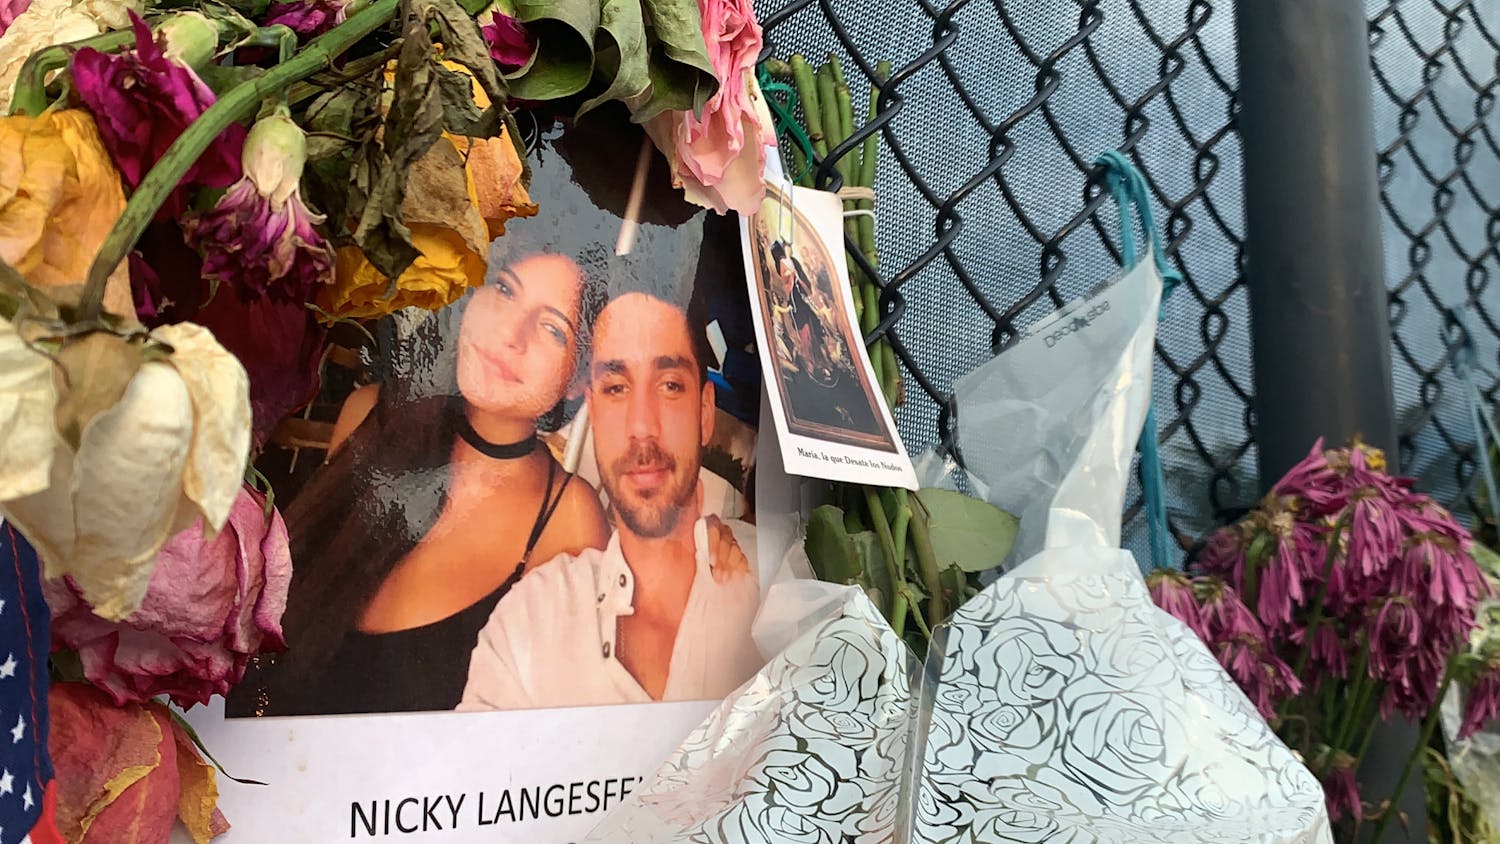 A photo of Nicole "Nicky" Langesfeld and Luis Sadovnic hangs on a memorial wall in Surfside, Florida on Saturday, July 3, 2021. Langesfeld and Sadovnic are two UF alumni among the more than 100 people still unaccounted for after the partial collapse of the Champlain Towers South building on June 24. 